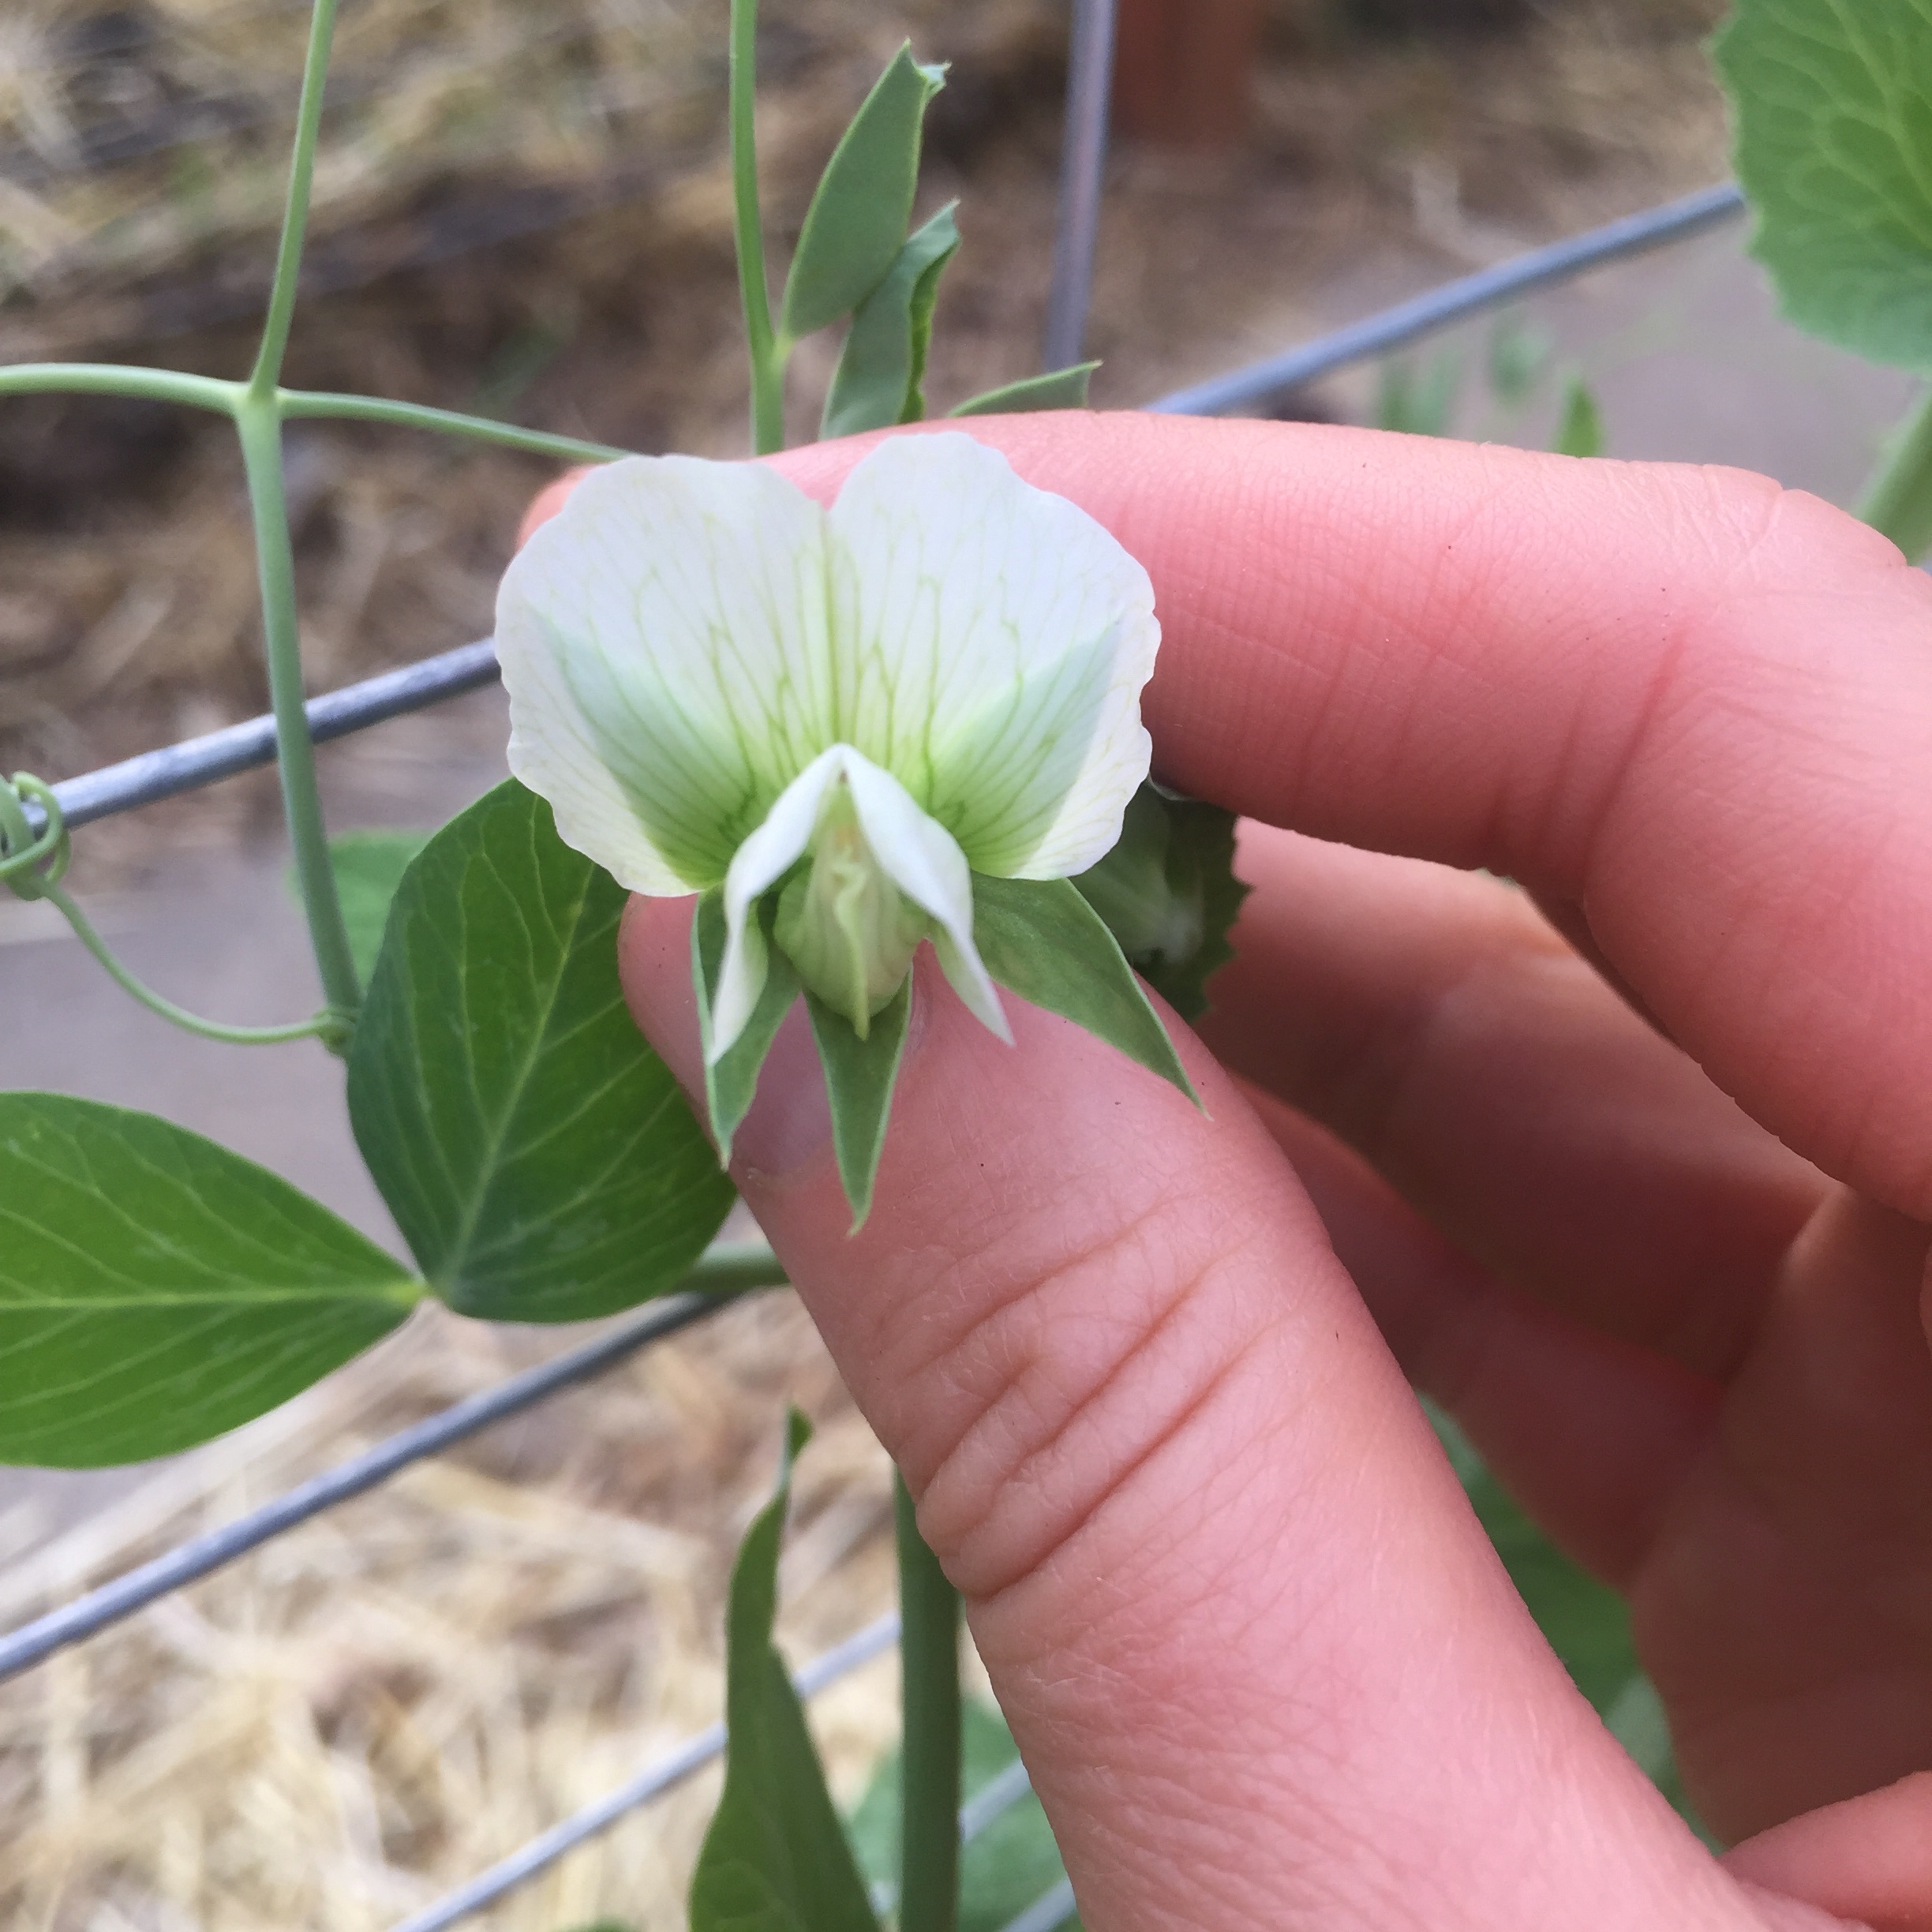 A white person holds a pea flower between their thumb and forefinger.